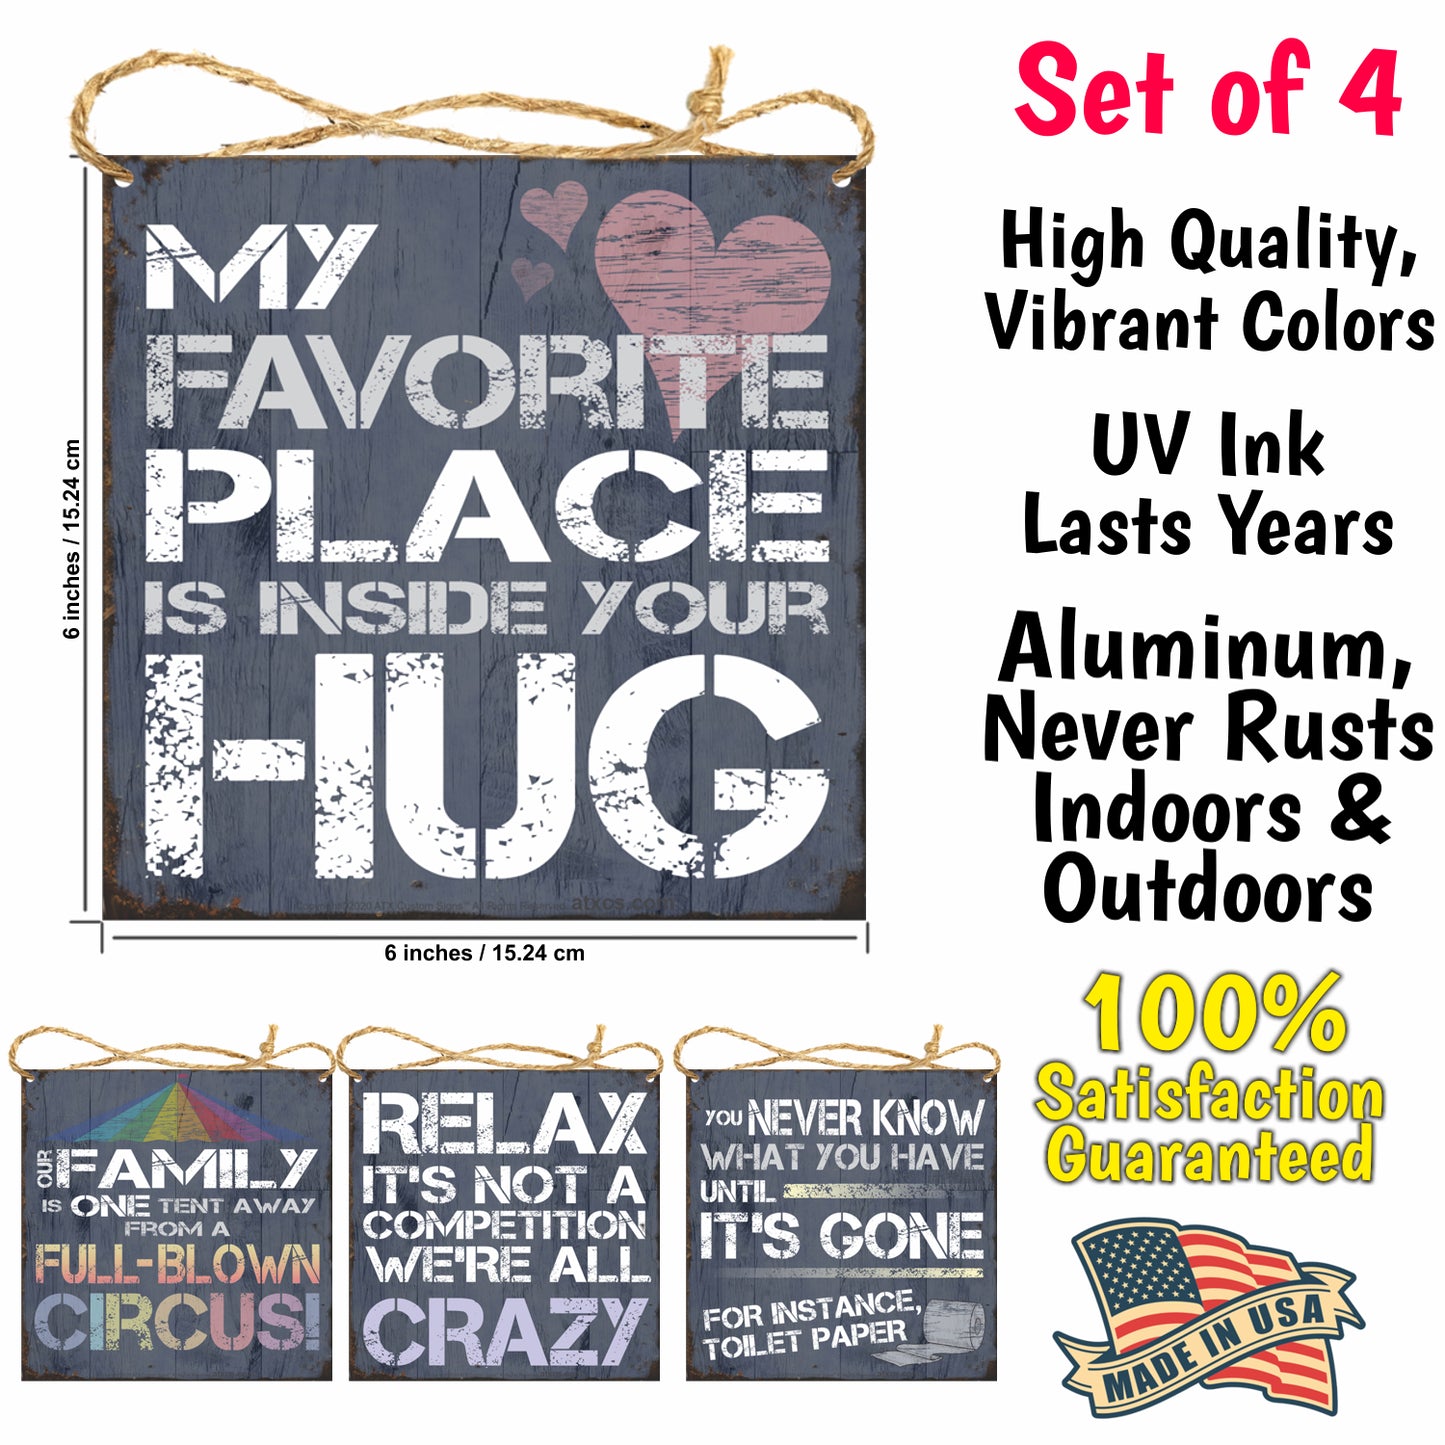 Pack of 4 Signs, Relax It's Not a Competition, Favorite Place is Inside Your Hug, Our Family is one Tent Away, You Never Know what you have